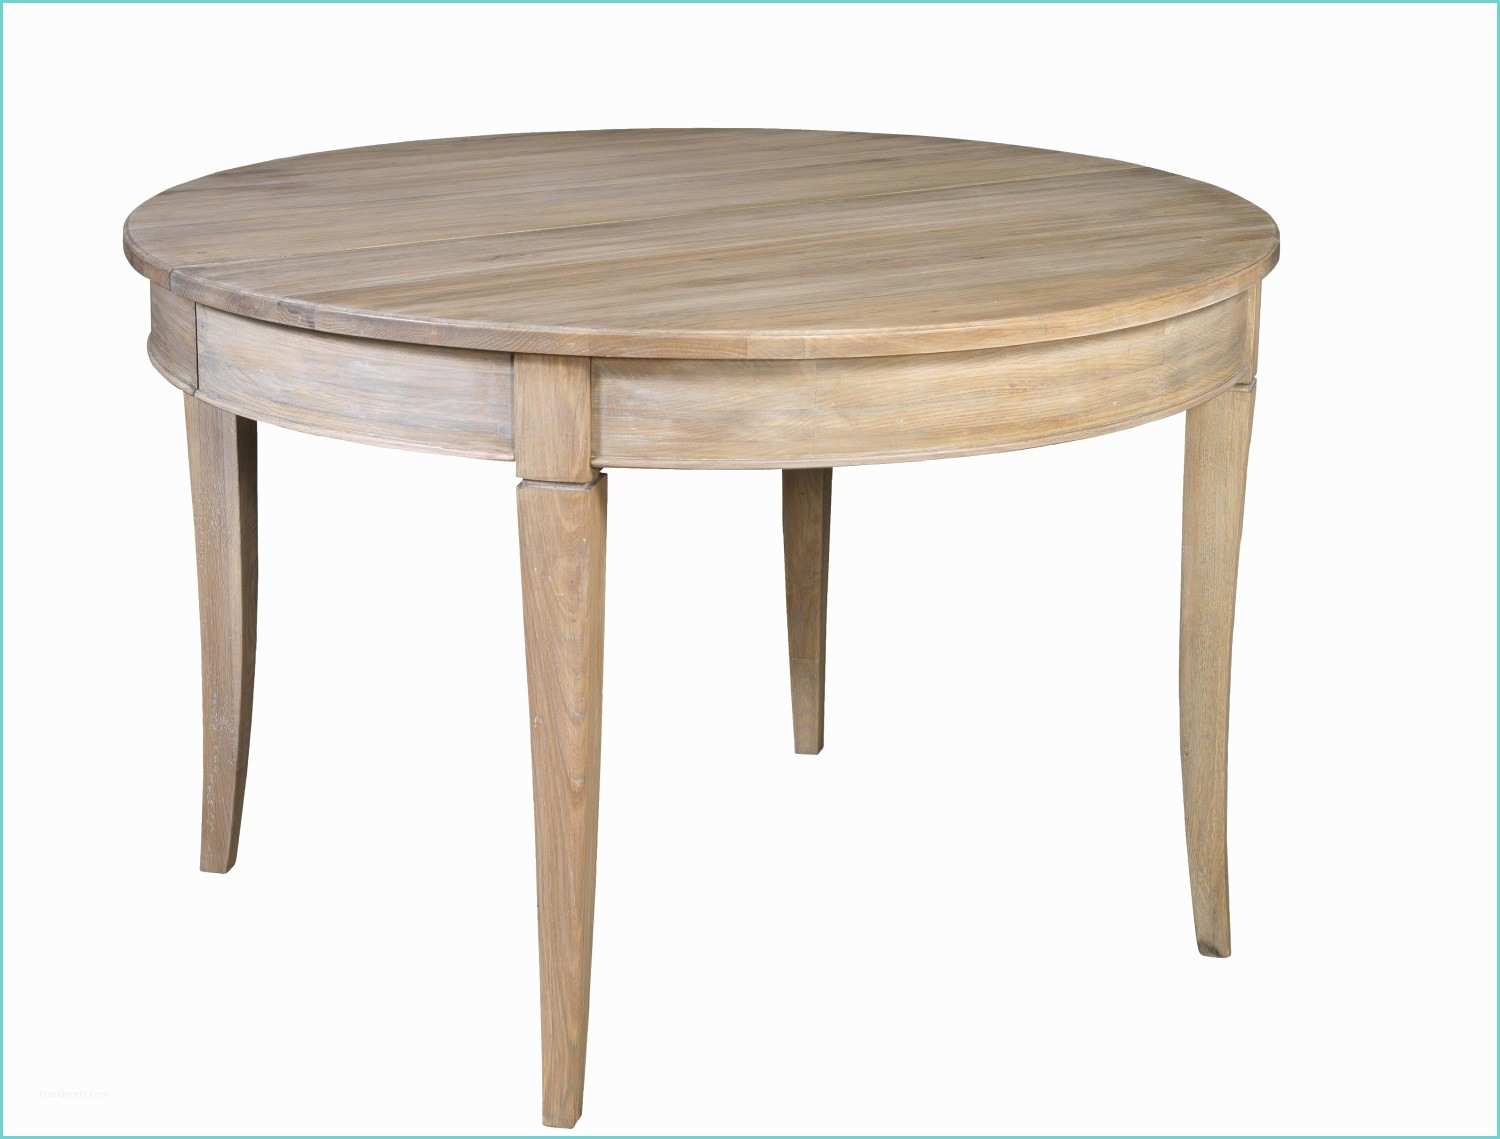 Table Mange Debout Extensible Amazing Table A Manger Ronde Avec Rallonge with Table